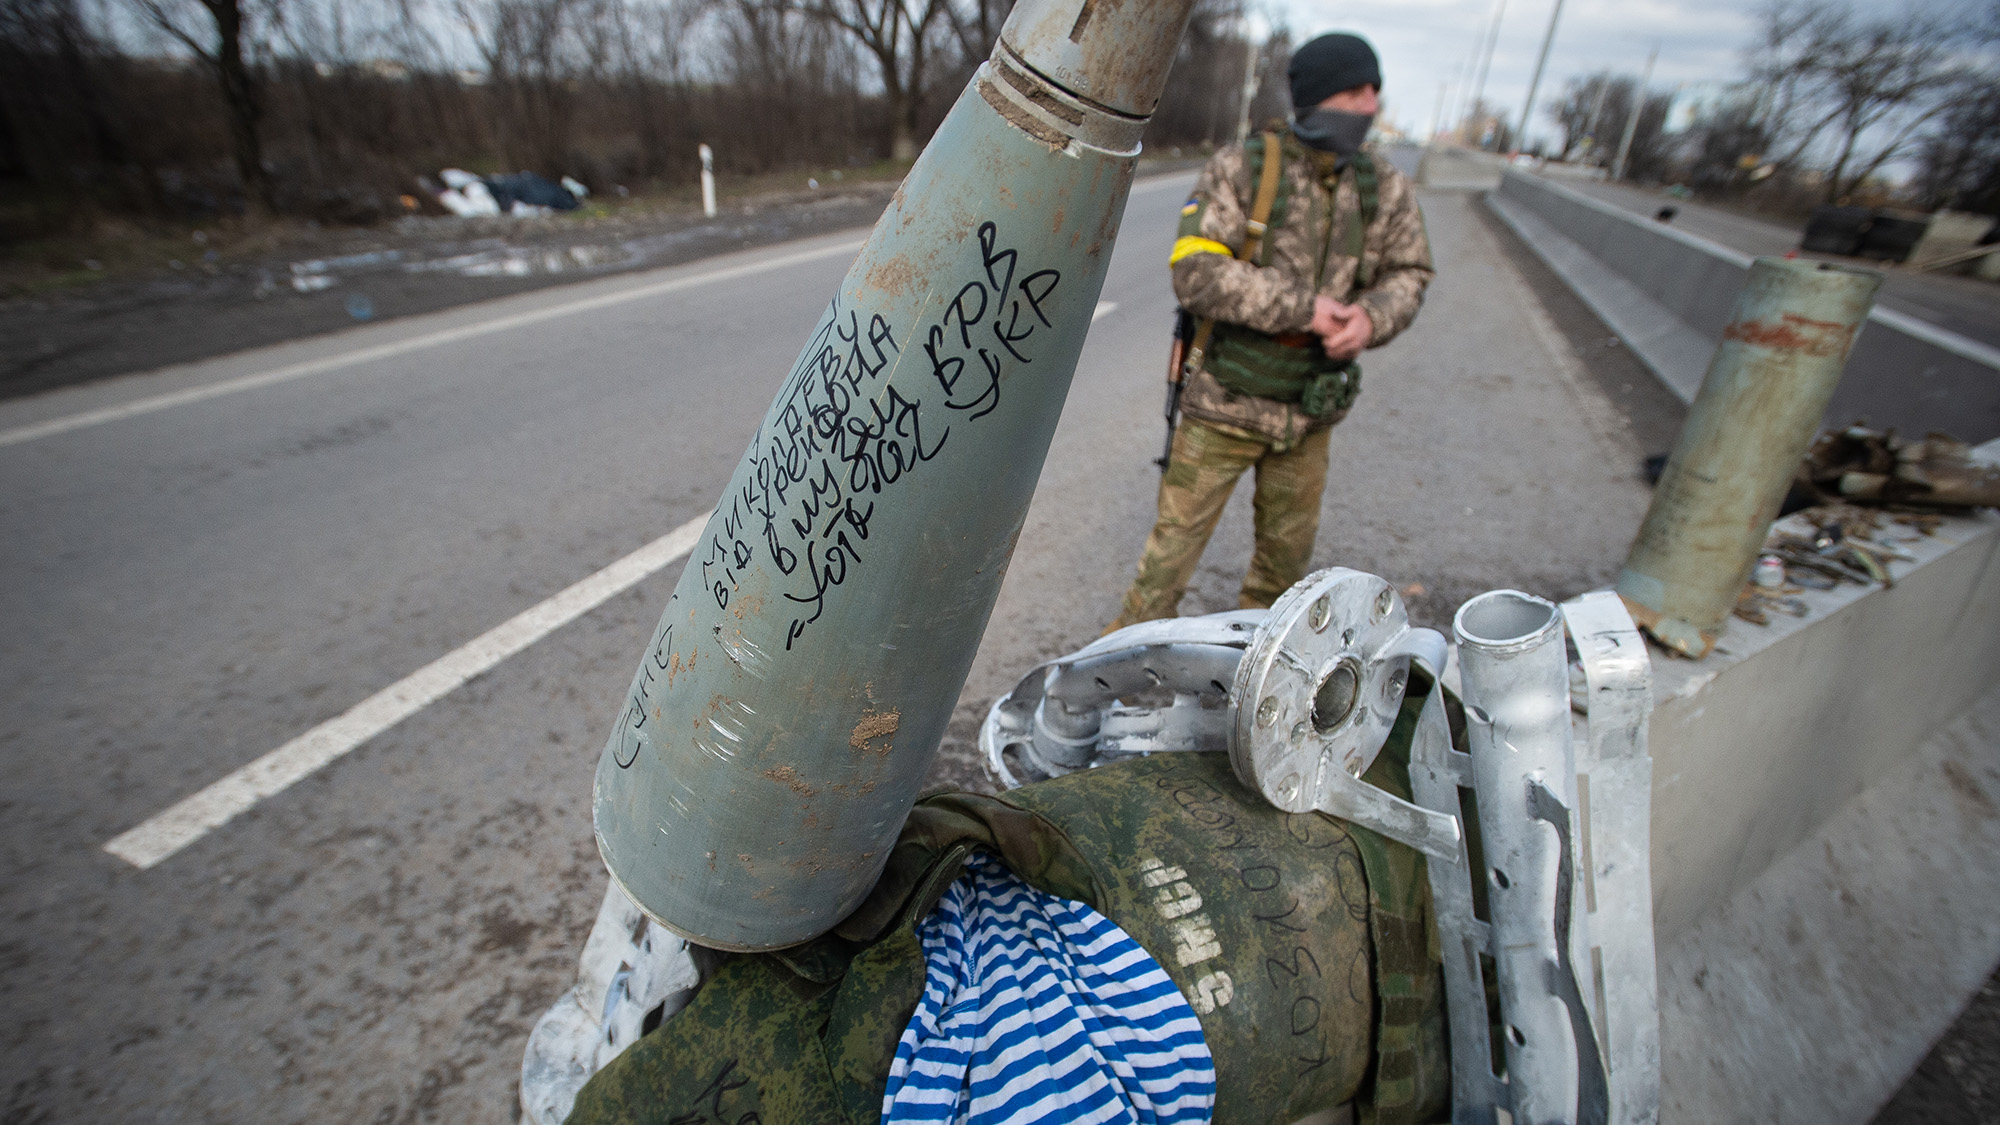 The remains of a cluster bomb rocket and other ordnance are collected as Ukraine Army troops dig in at frontline trench positions east of the strategic port city of Mykolaiv, Ukraine, on March 10, 2022.